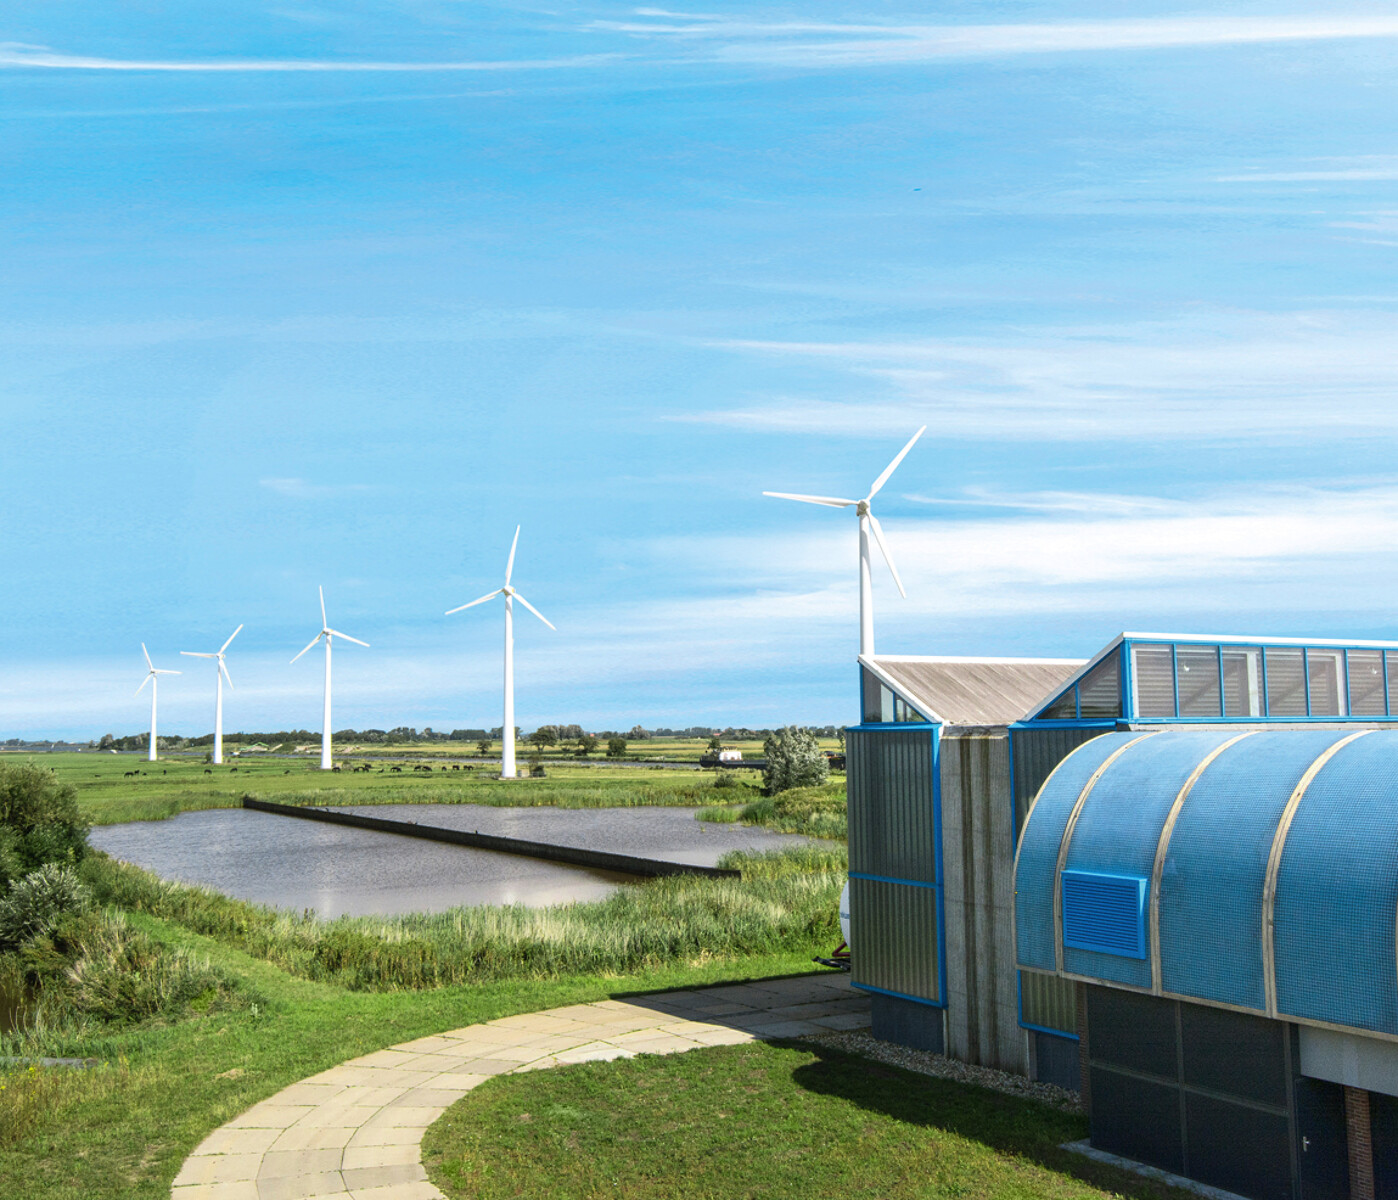 The biggest drinking water treatment plant in the Netherlands